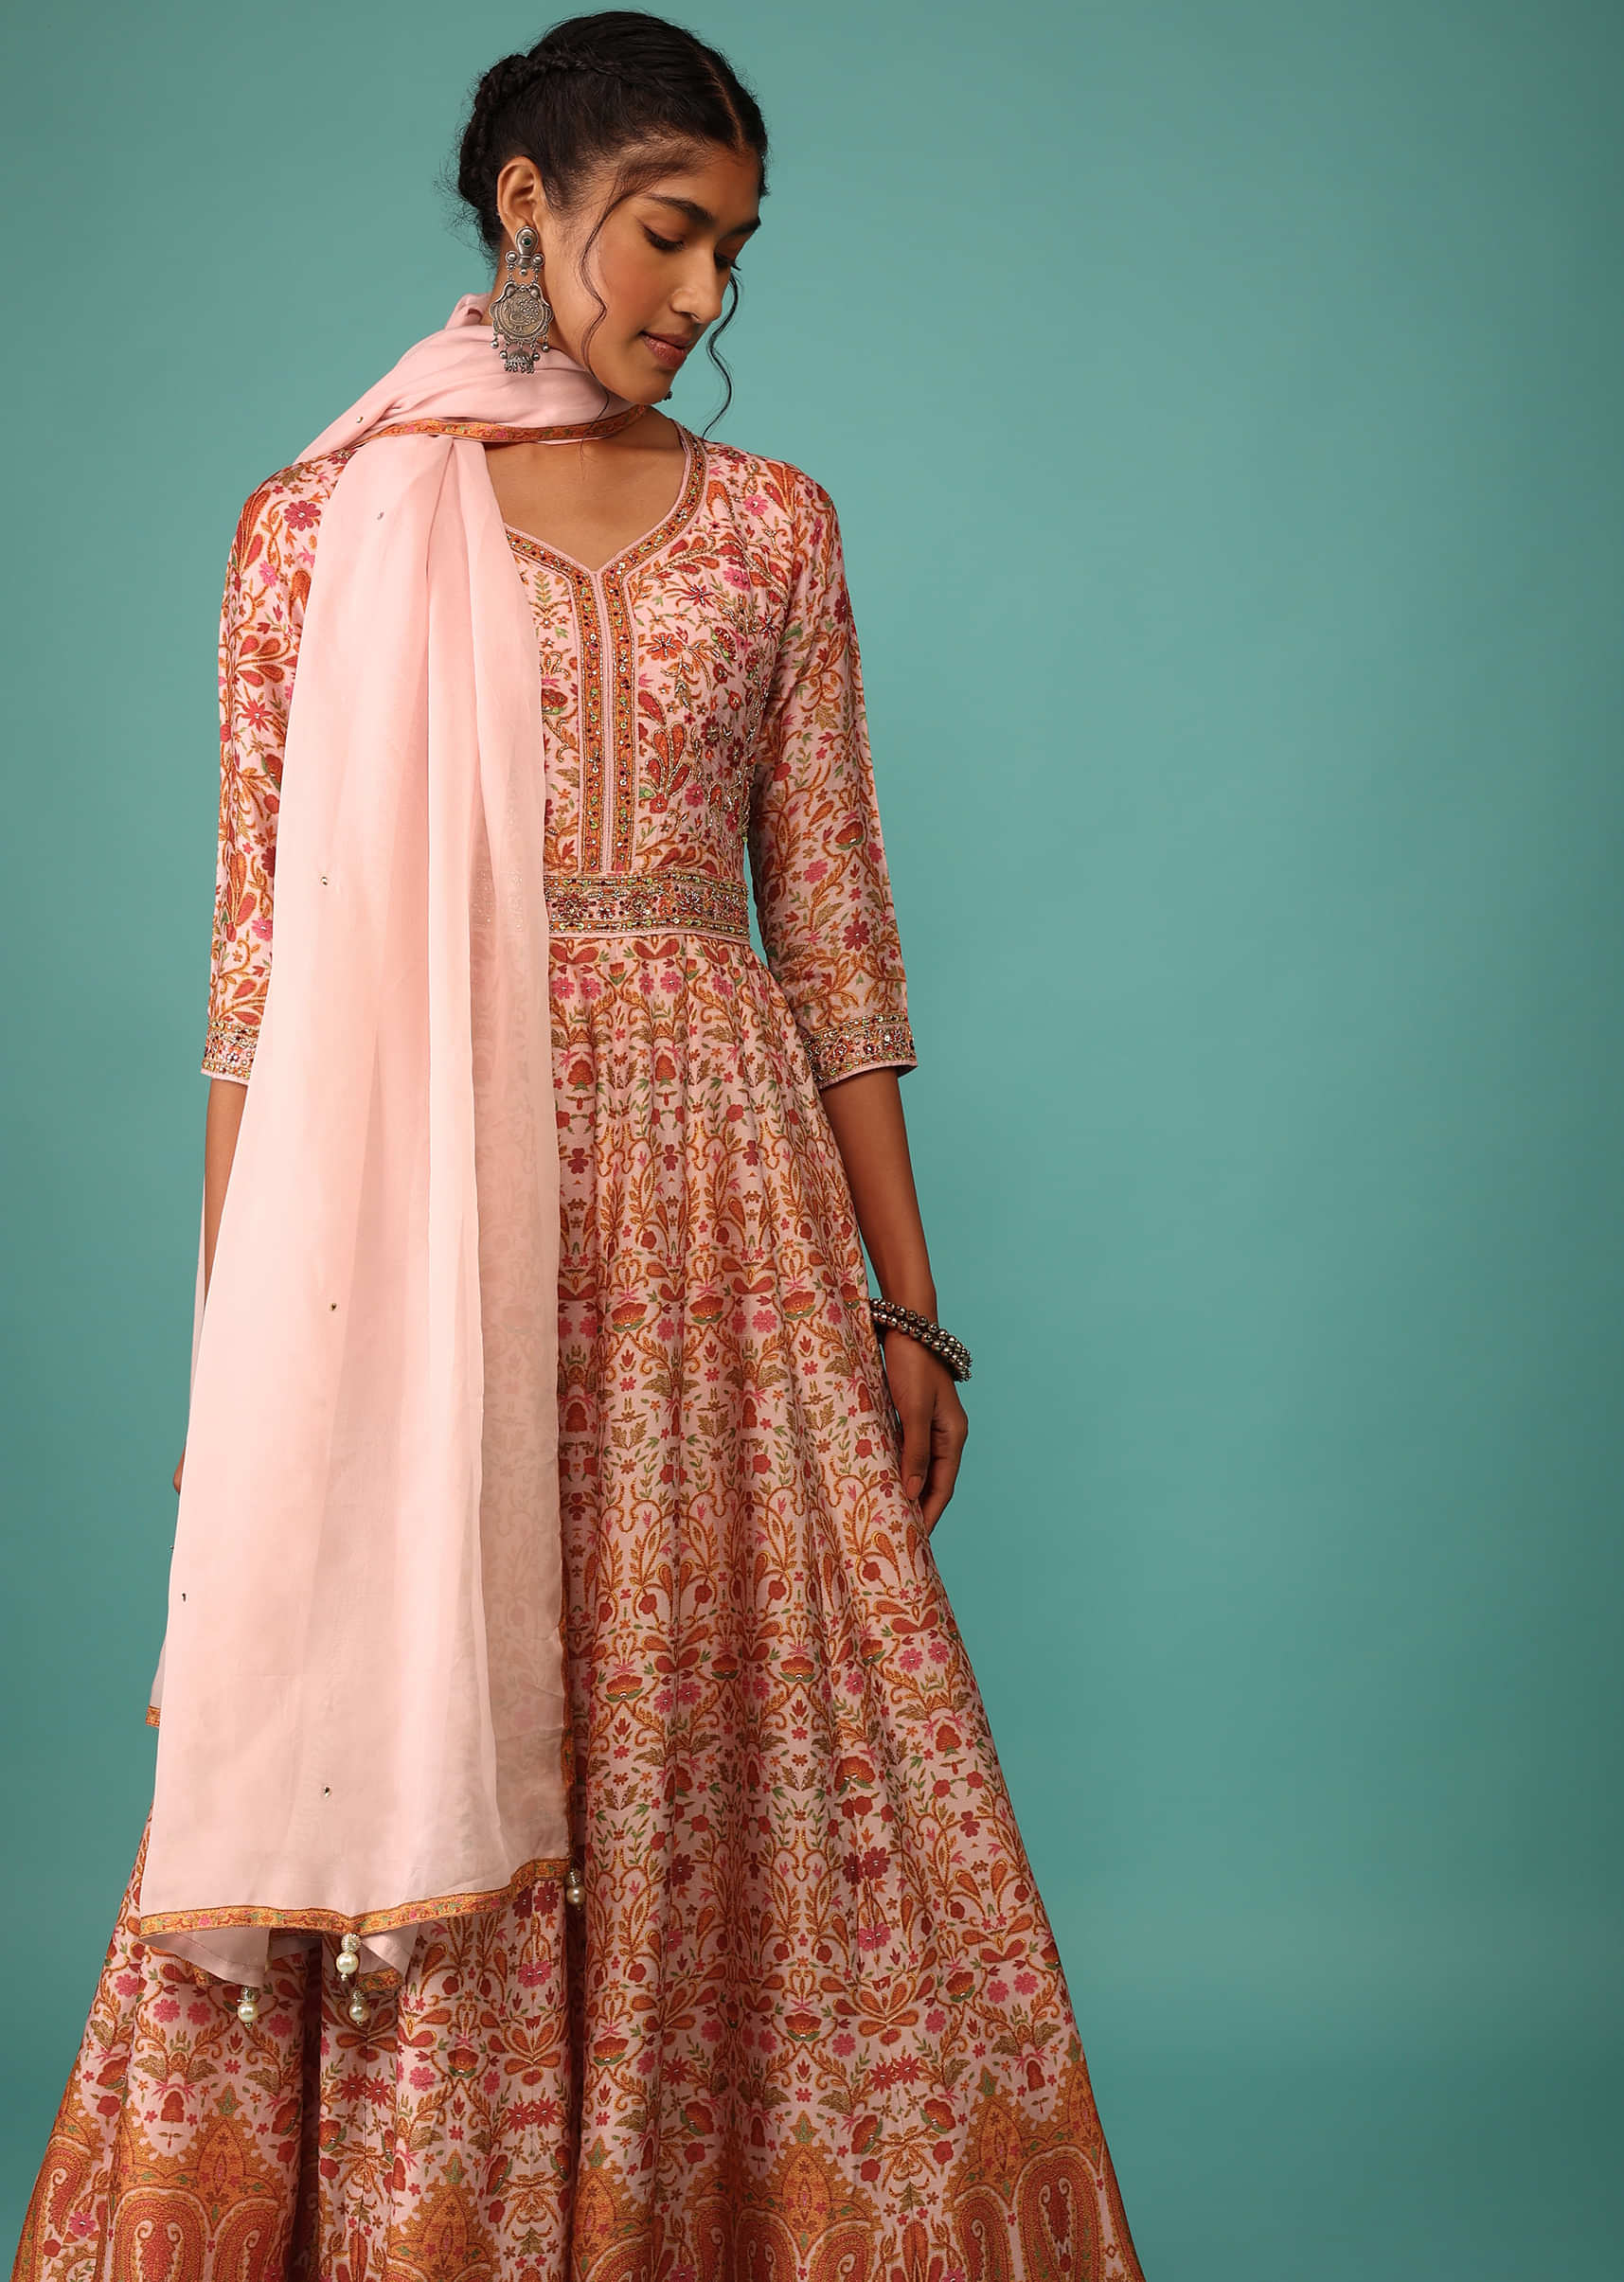 Candy Pink Anarkali Suit Set In Raw Silk With Kashmiri Print Work And Embroidery